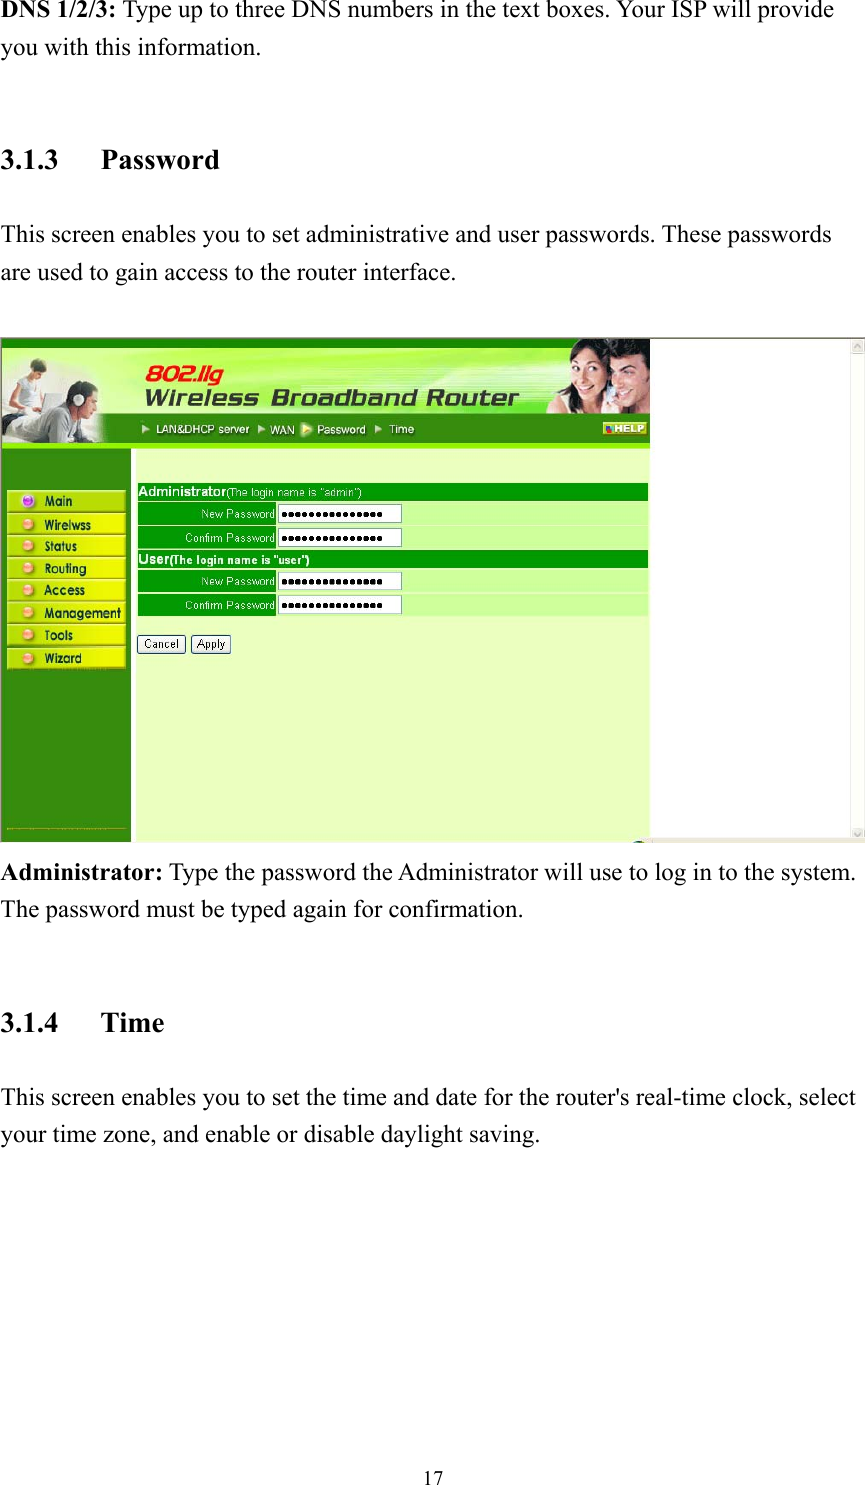  17DNS 1/2/3: Type up to three DNS numbers in the text boxes. Your ISP will provide you with this information.  3.1.3 Password This screen enables you to set administrative and user passwords. These passwords are used to gain access to the router interface.   Administrator: Type the password the Administrator will use to log in to the system. The password must be typed again for confirmation.  3.1.4 Time This screen enables you to set the time and date for the router&apos;s real-time clock, select your time zone, and enable or disable daylight saving. 